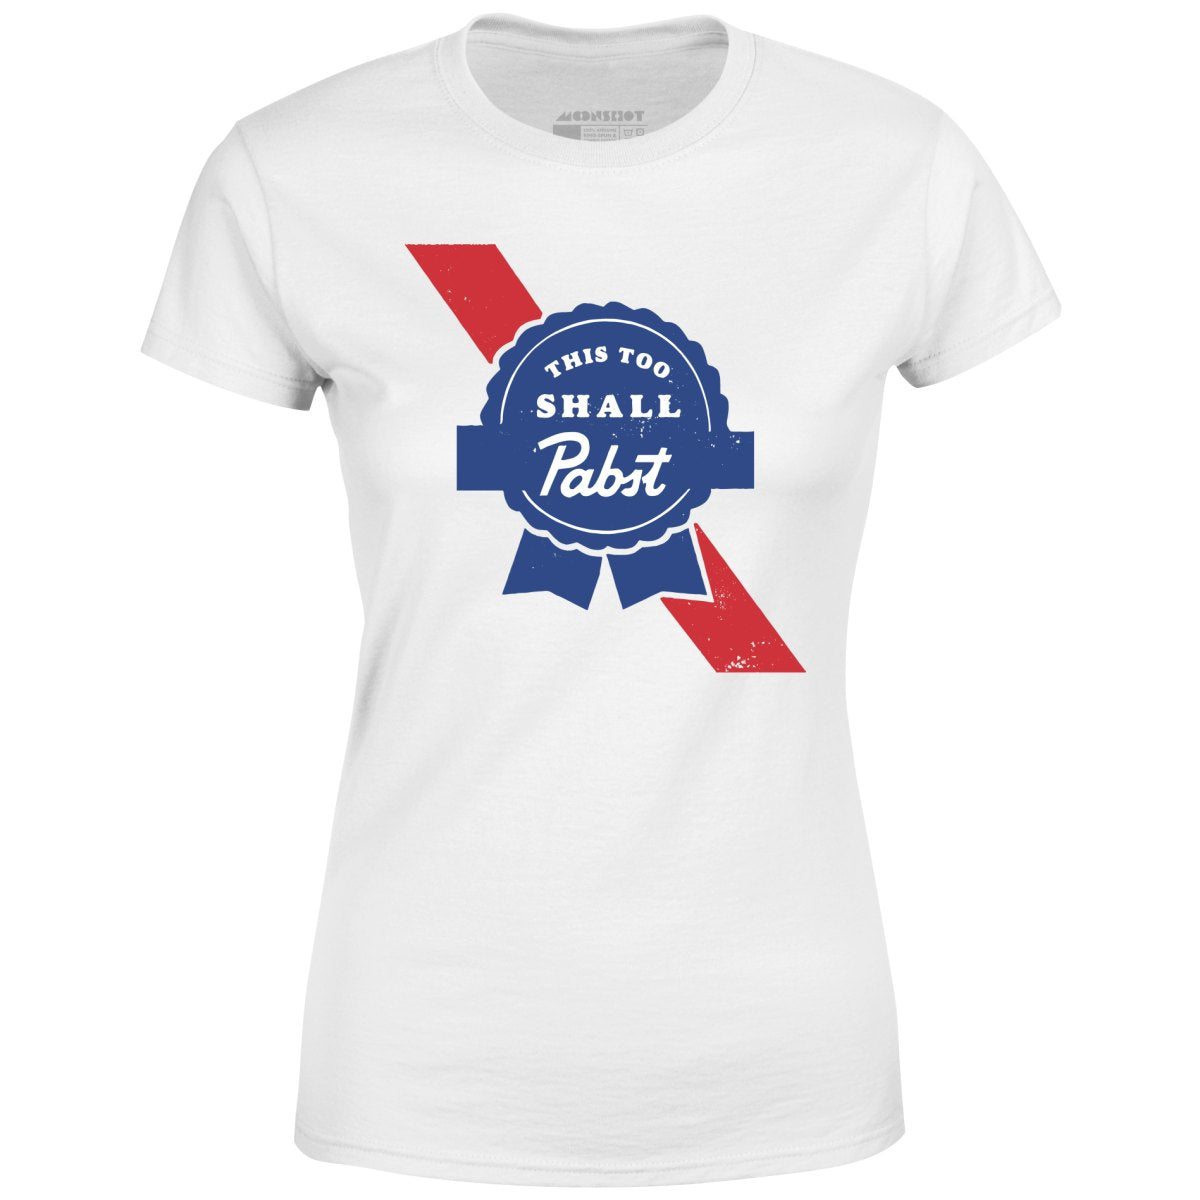 This Too Shall Pabst - Women's T-Shirt